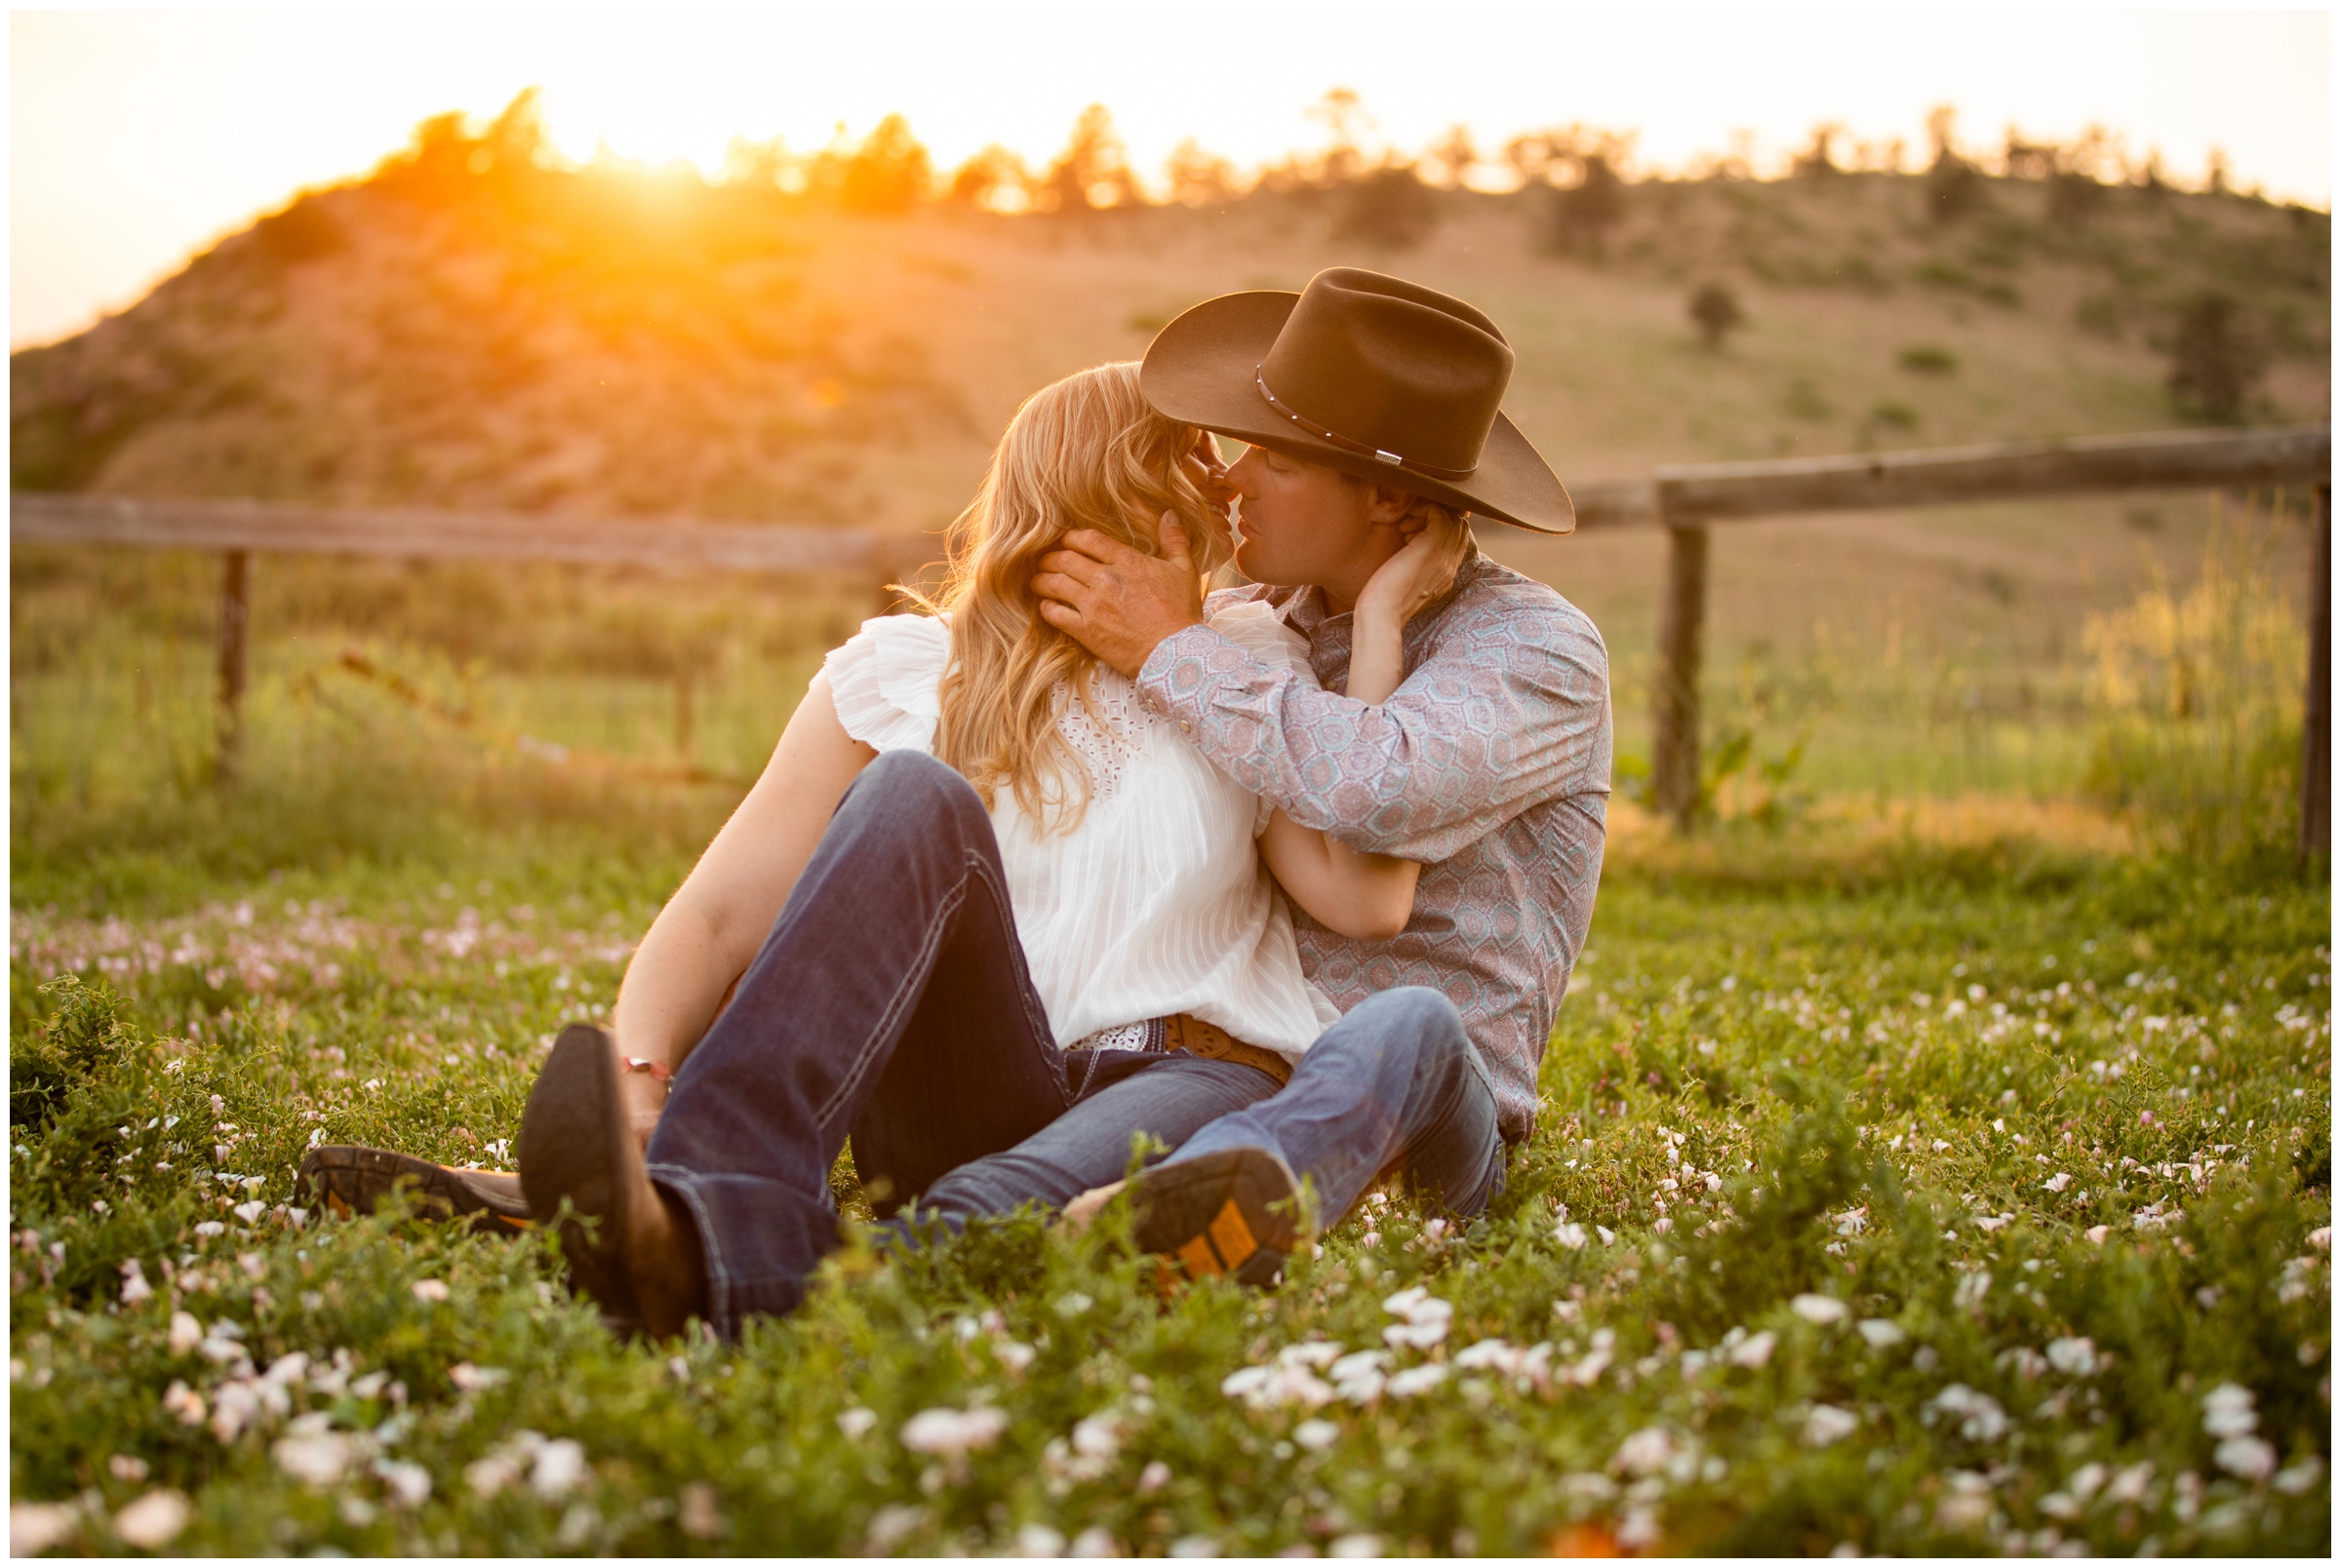 Rustic engagement couples photography session in northern Colorado by plum pretty photo